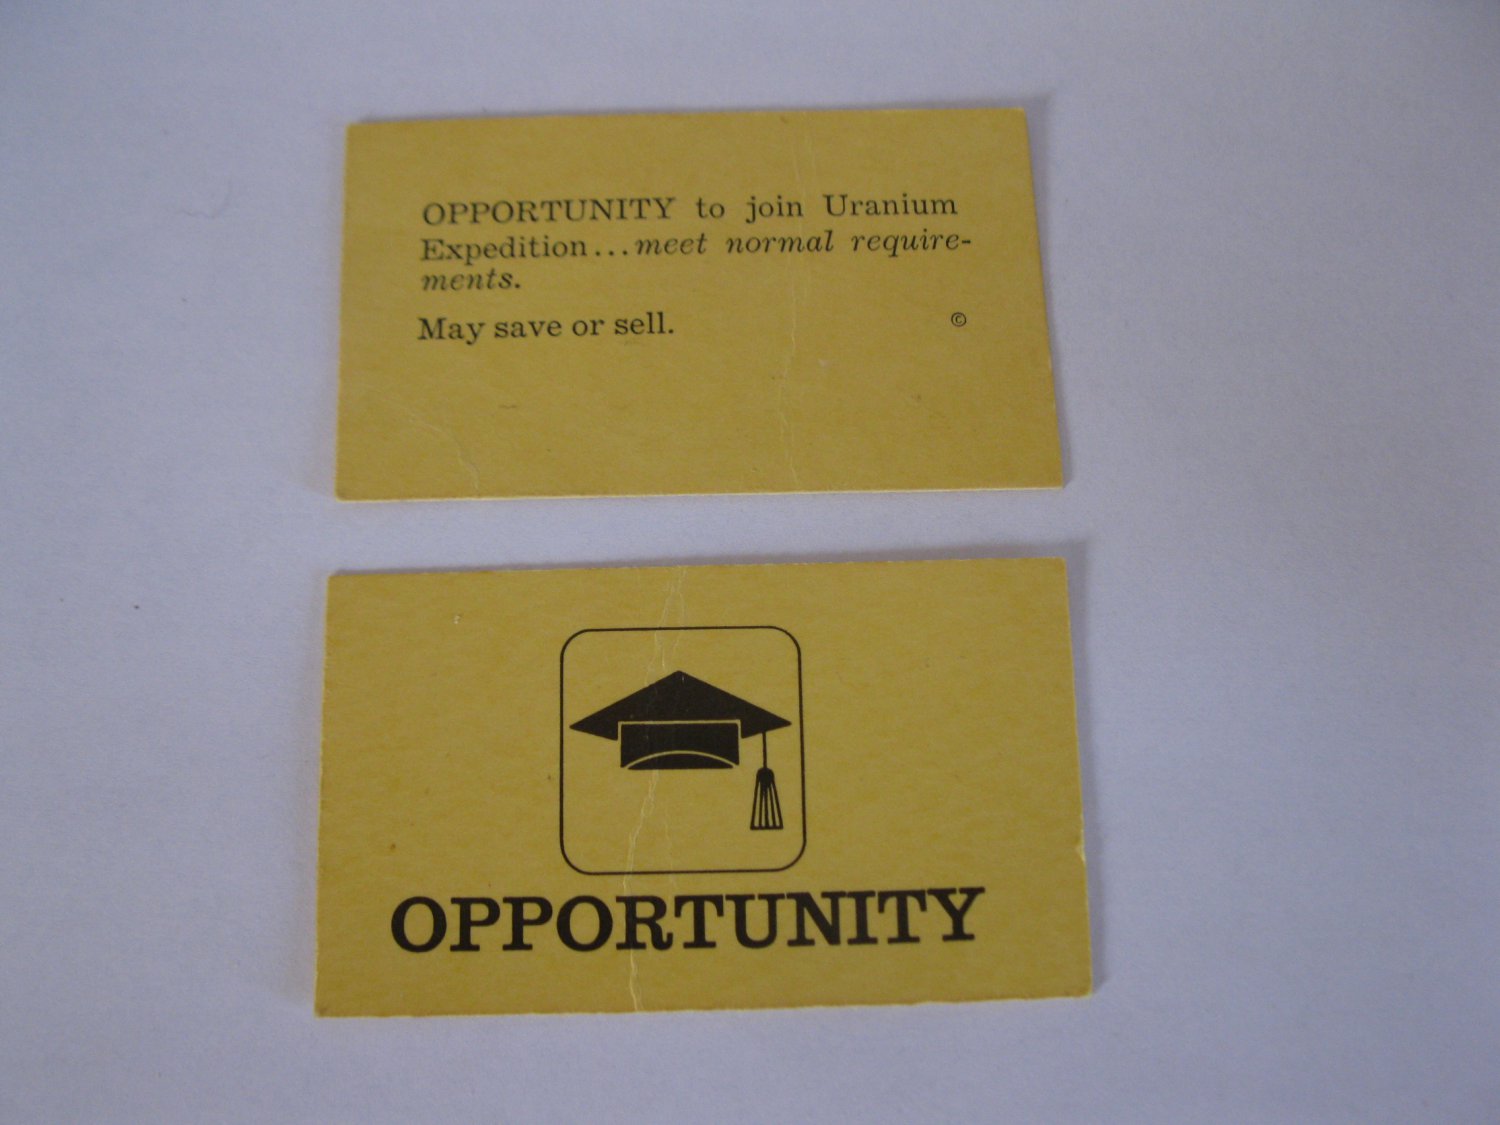 1965 Careers Board Game Piece: Yellow Opportunity Card - Uranium